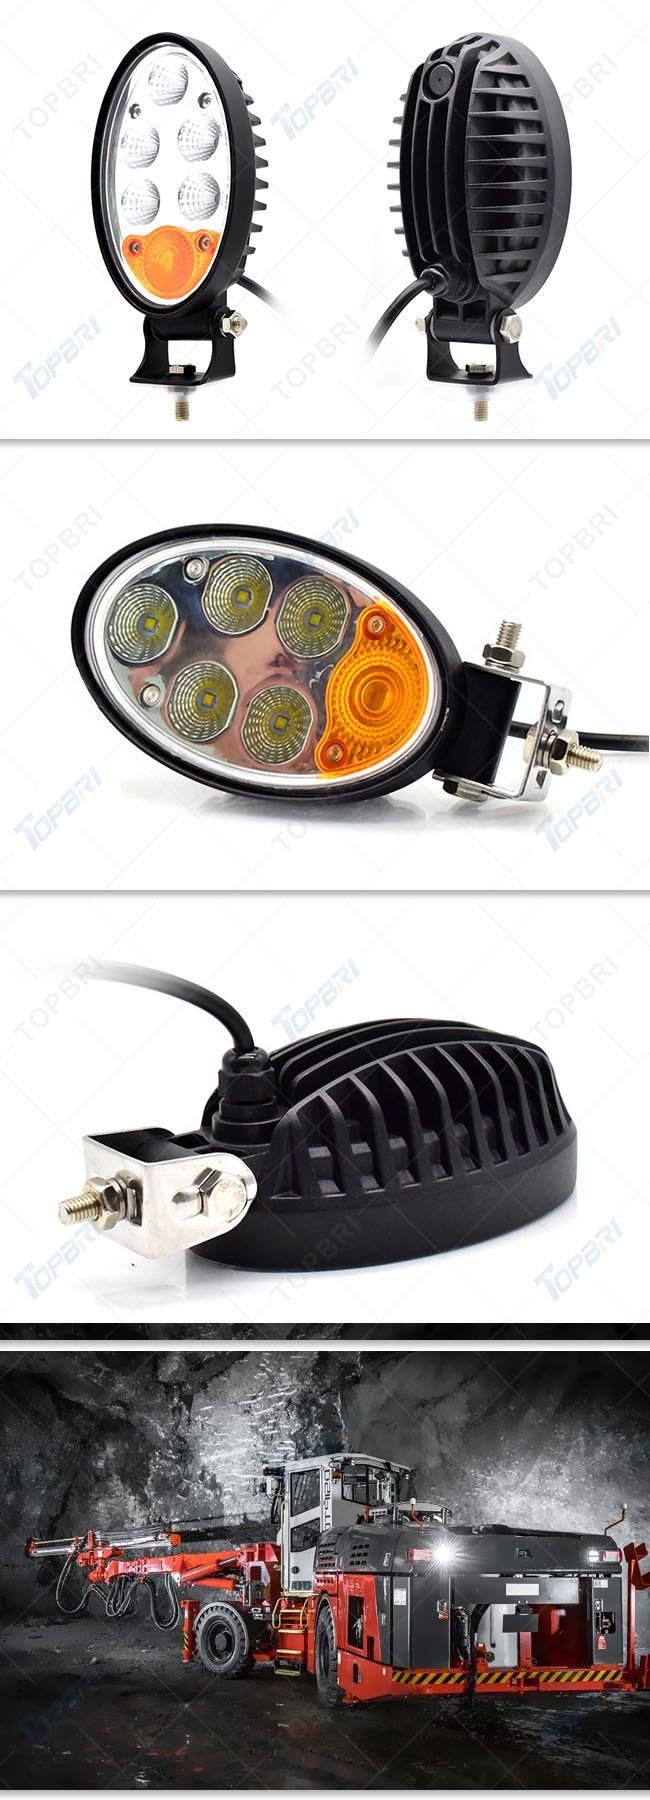 Oval Amber White LED Agriculture Work Working Light for Tractor